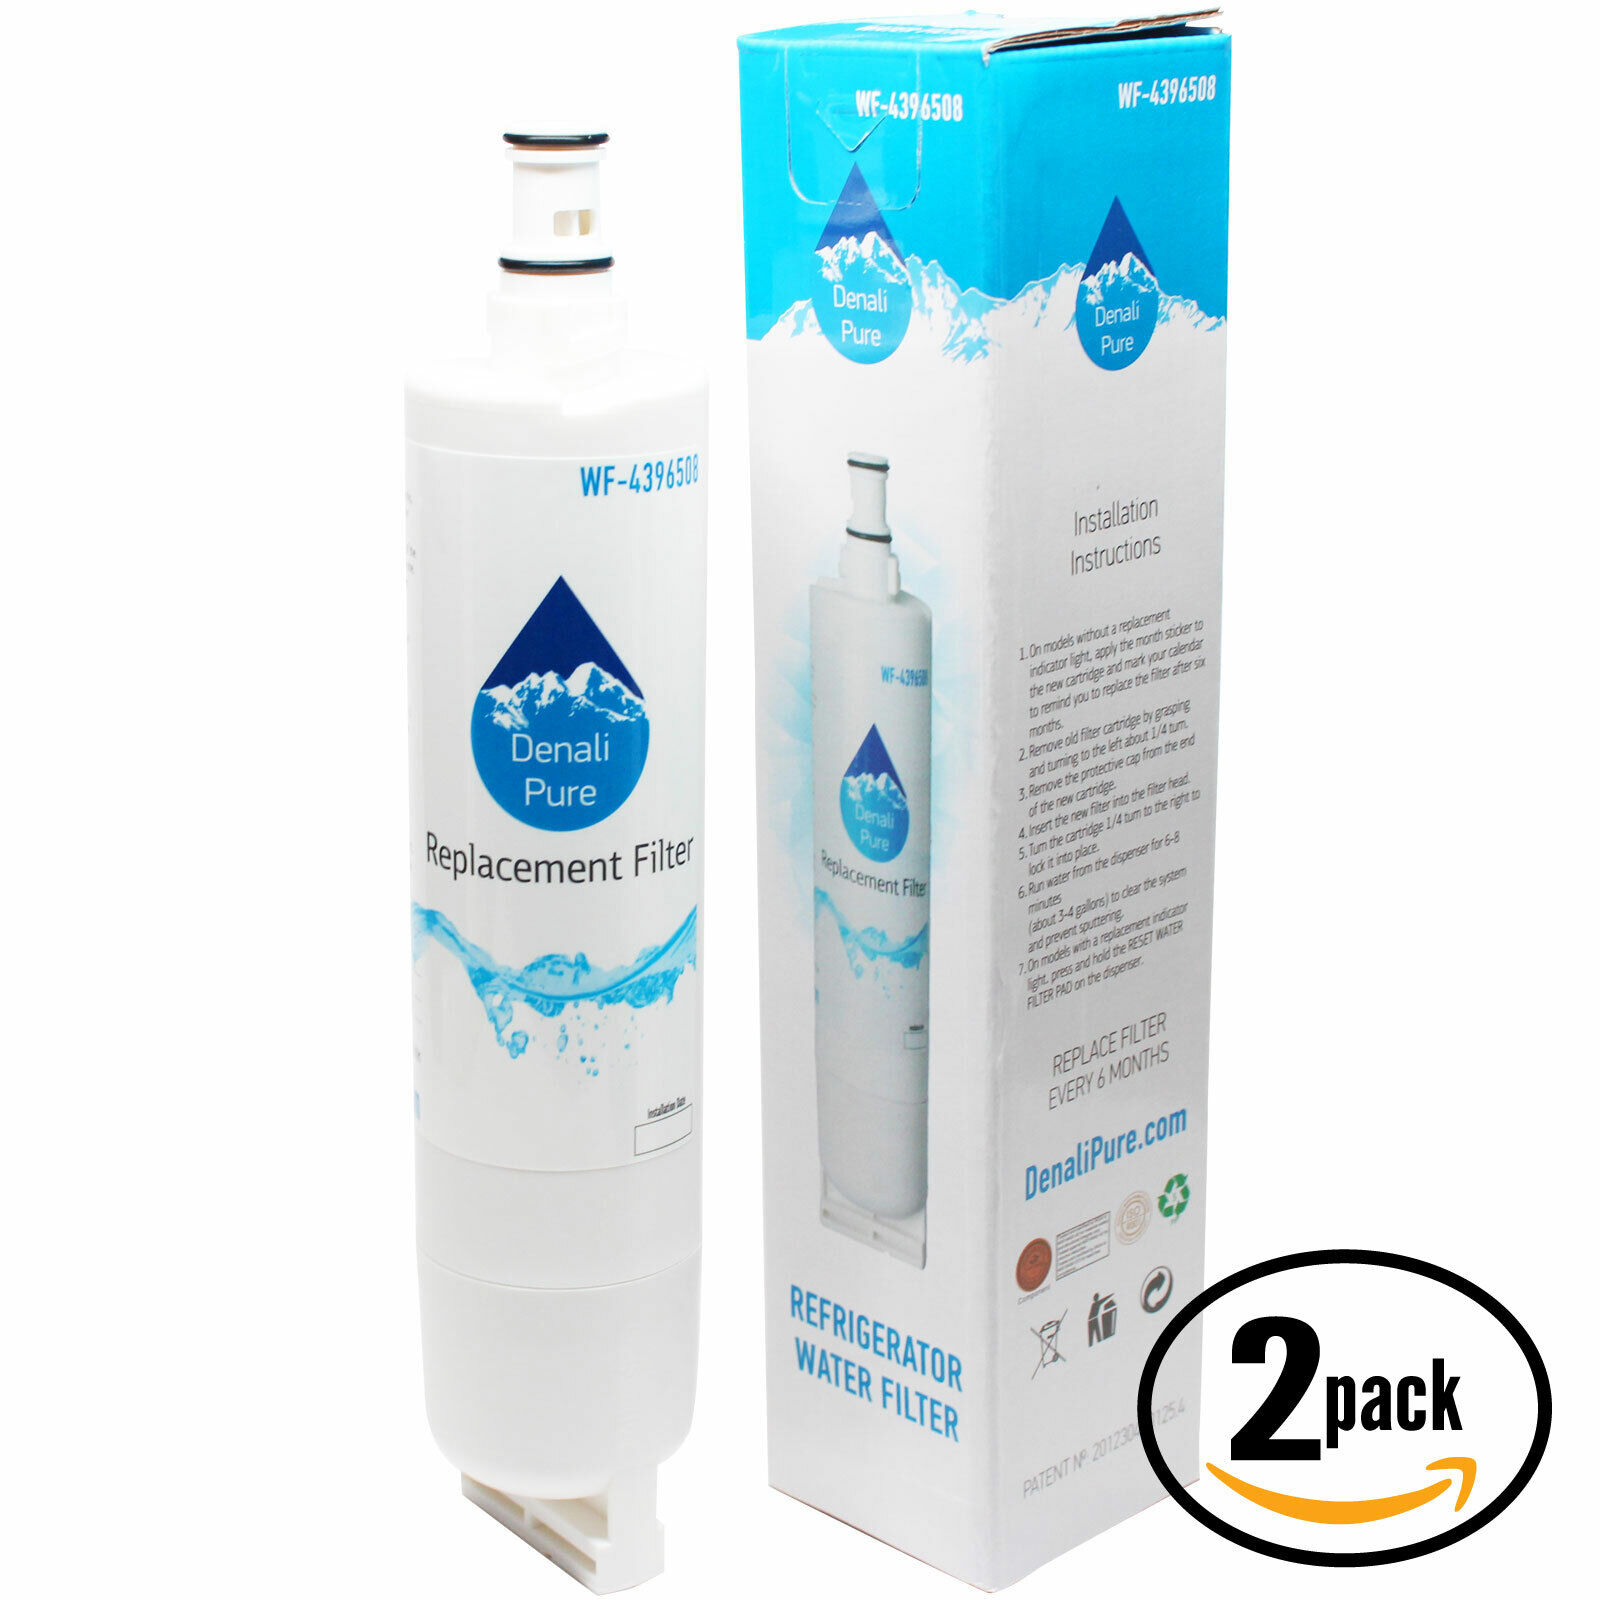 2X Refrigerator Spasm price Water Filter Sears 10656646500 for Over item handling Kenmore